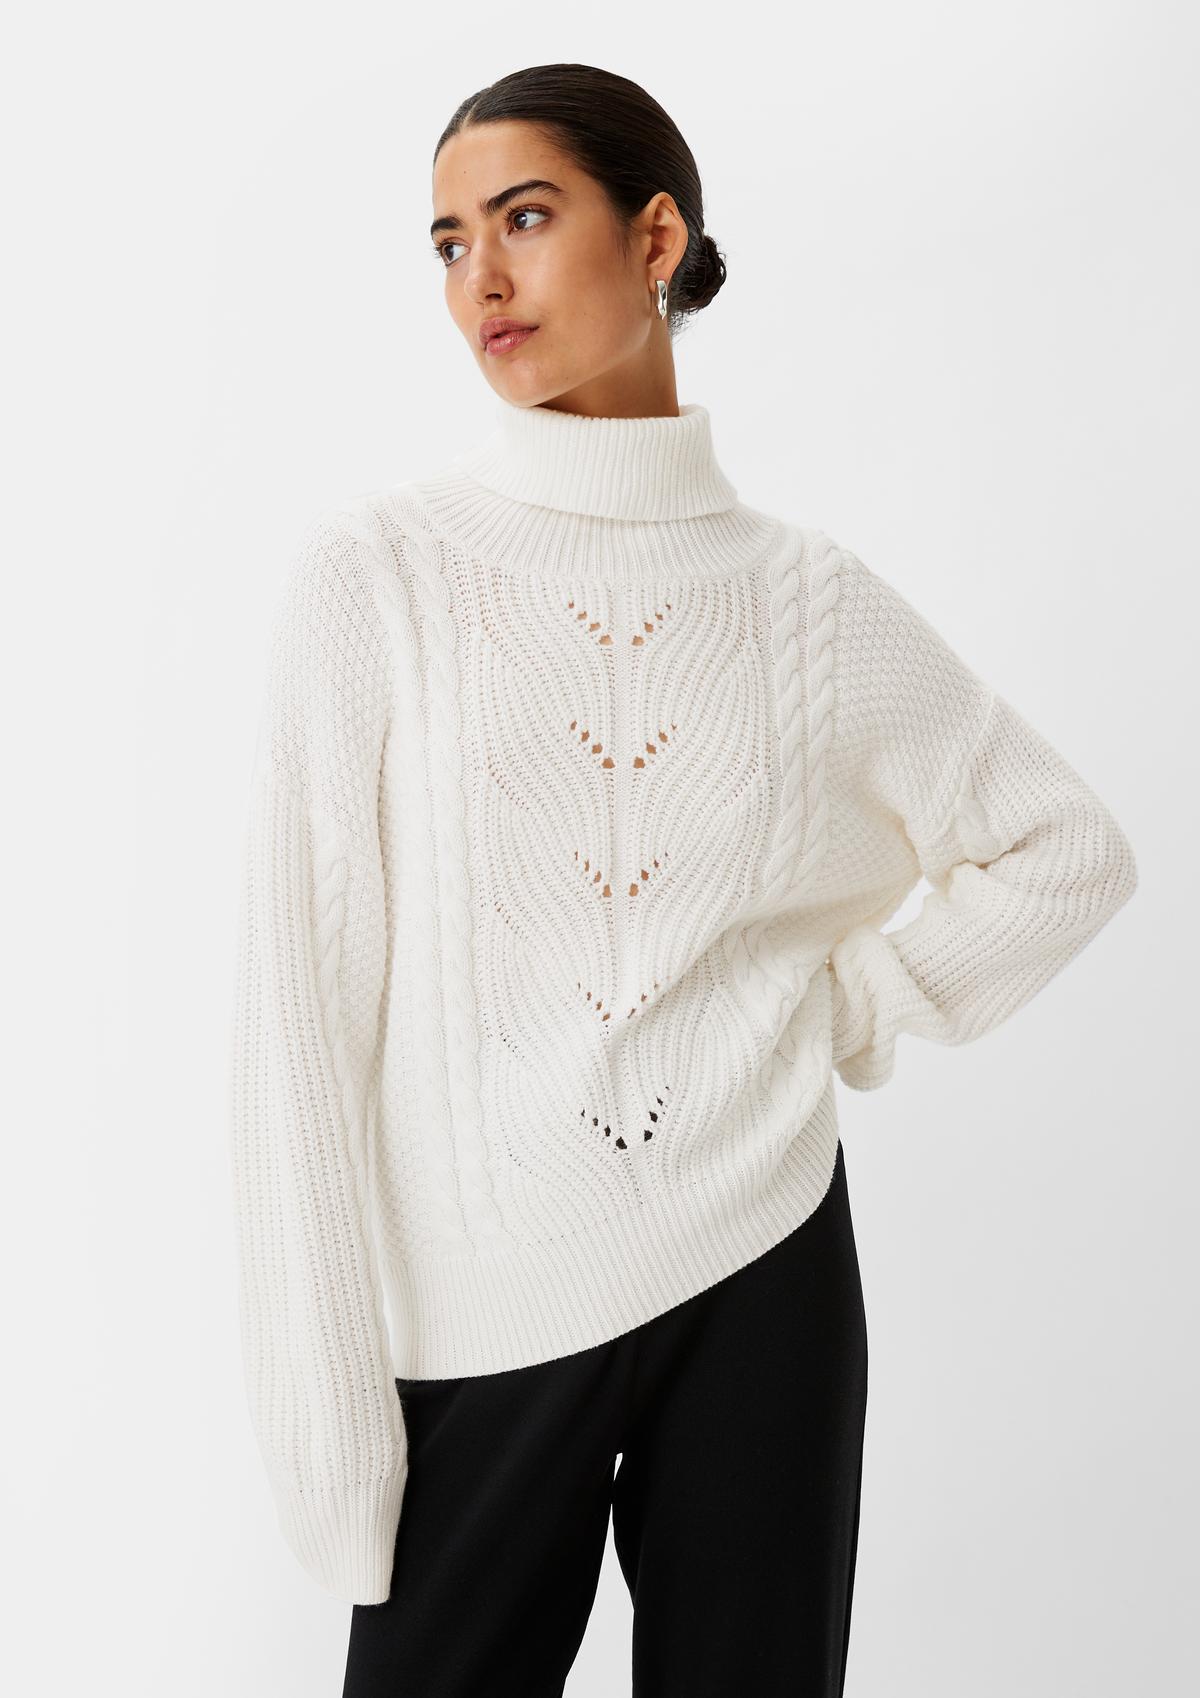 Knitted jumper with an openwork pattern